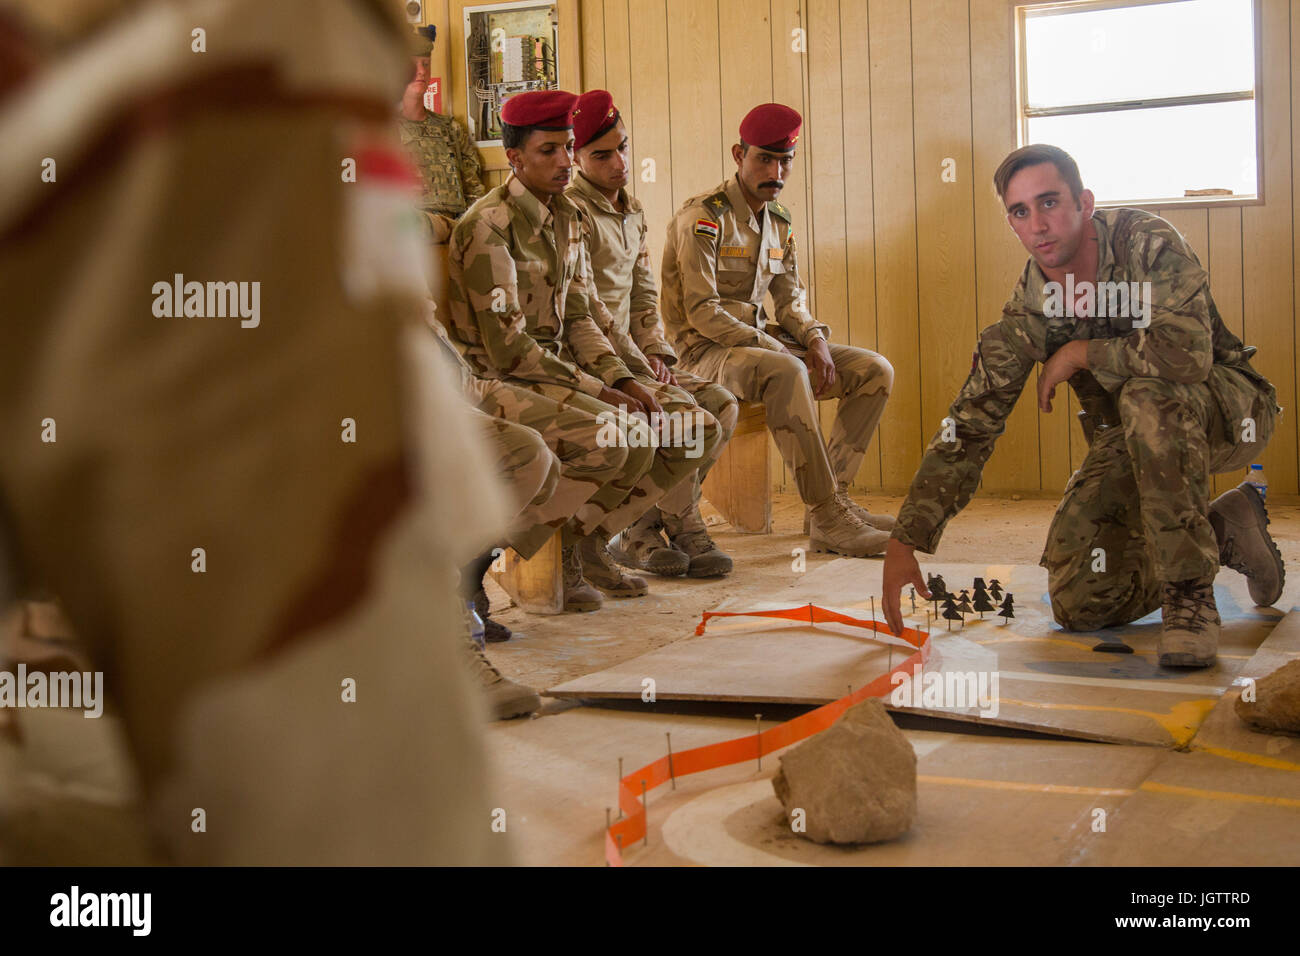 British trainer Lance Cpl. Andrew shows Iraqi soldiers where to suspect improvised explosive devices on a map during a counter I.E.D. class at Camp Al Asad, Iraq, July 2, 2017. This training is critical to enabling local security forces to liberate their homeland from ISIS. CJTF-OIR is the global Coalition to defeat ISIS in Iraq and Syria.  (U.S. Army photo by Spc. Cole Erickson) Stock Photo